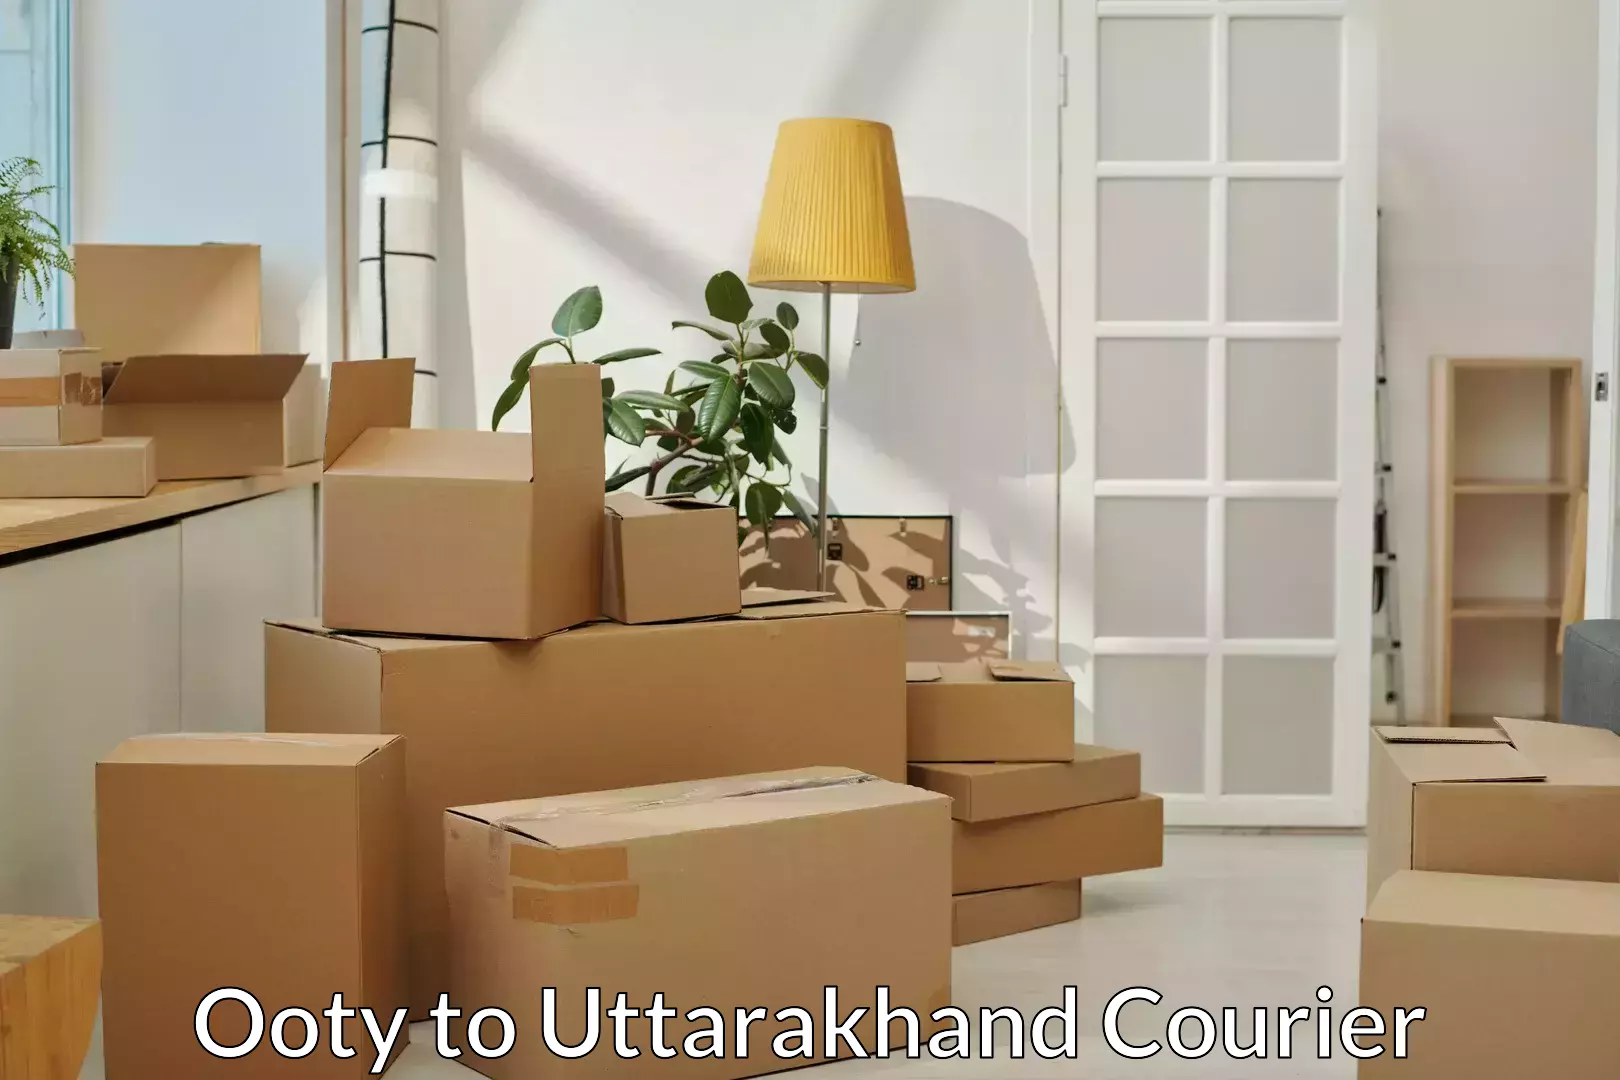 Professional furniture movers Ooty to Uttarakhand